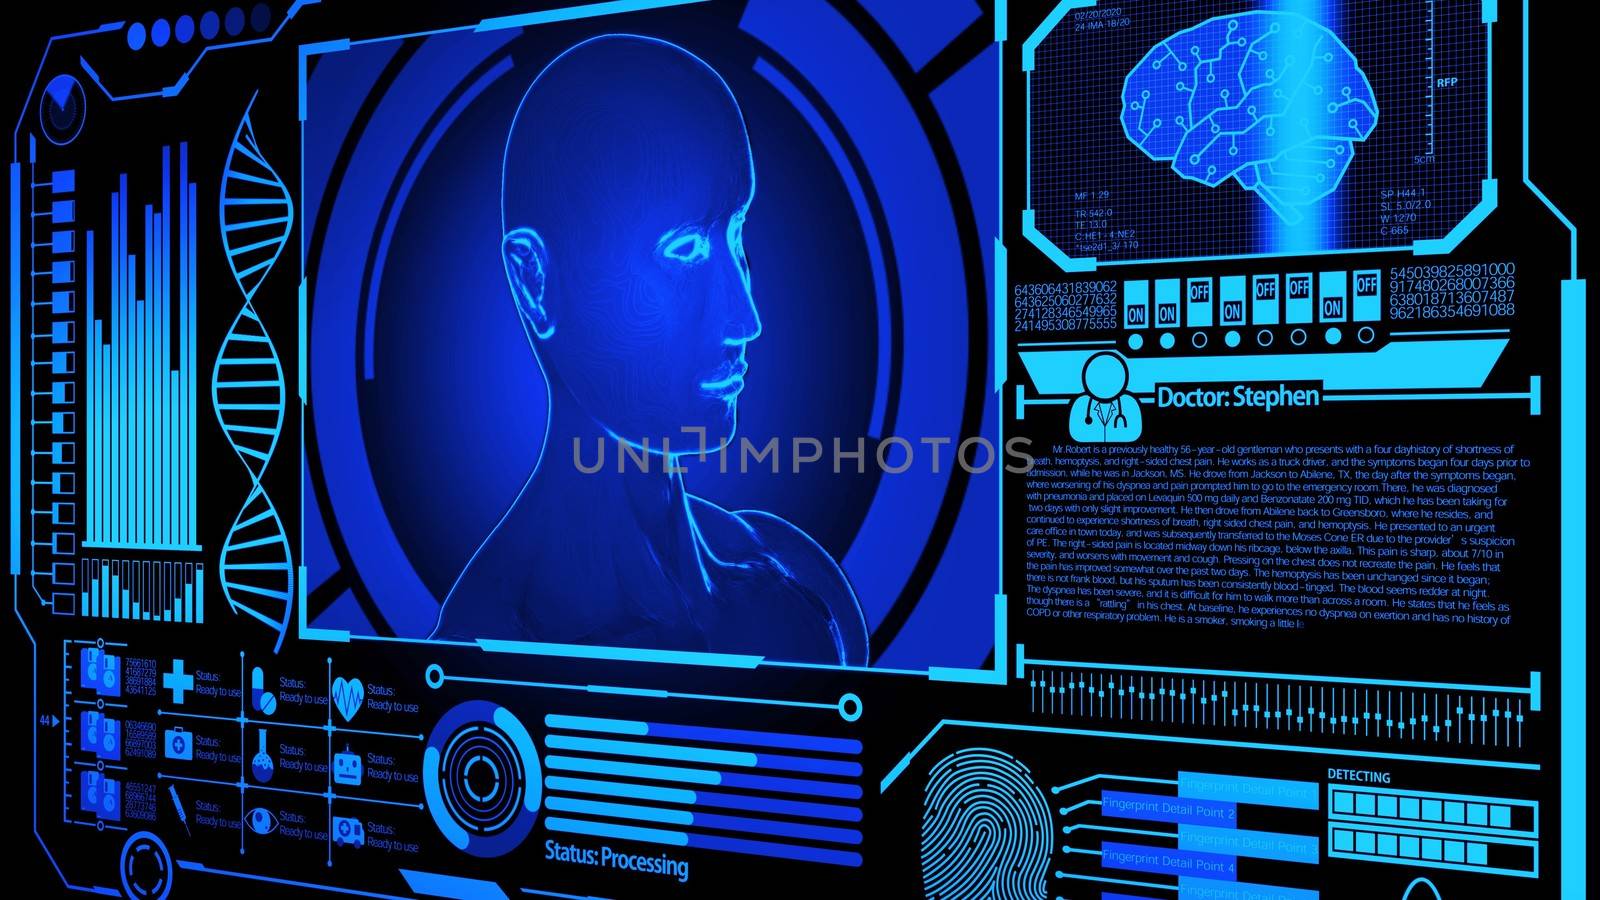 3D Human Head Model Rendering Rotating in Medical Futuristic HUD Display Screen including DNA, Digital Brain Scan, Fingerprint and more with Blue Color Still Image Ver.3 by ariya23156